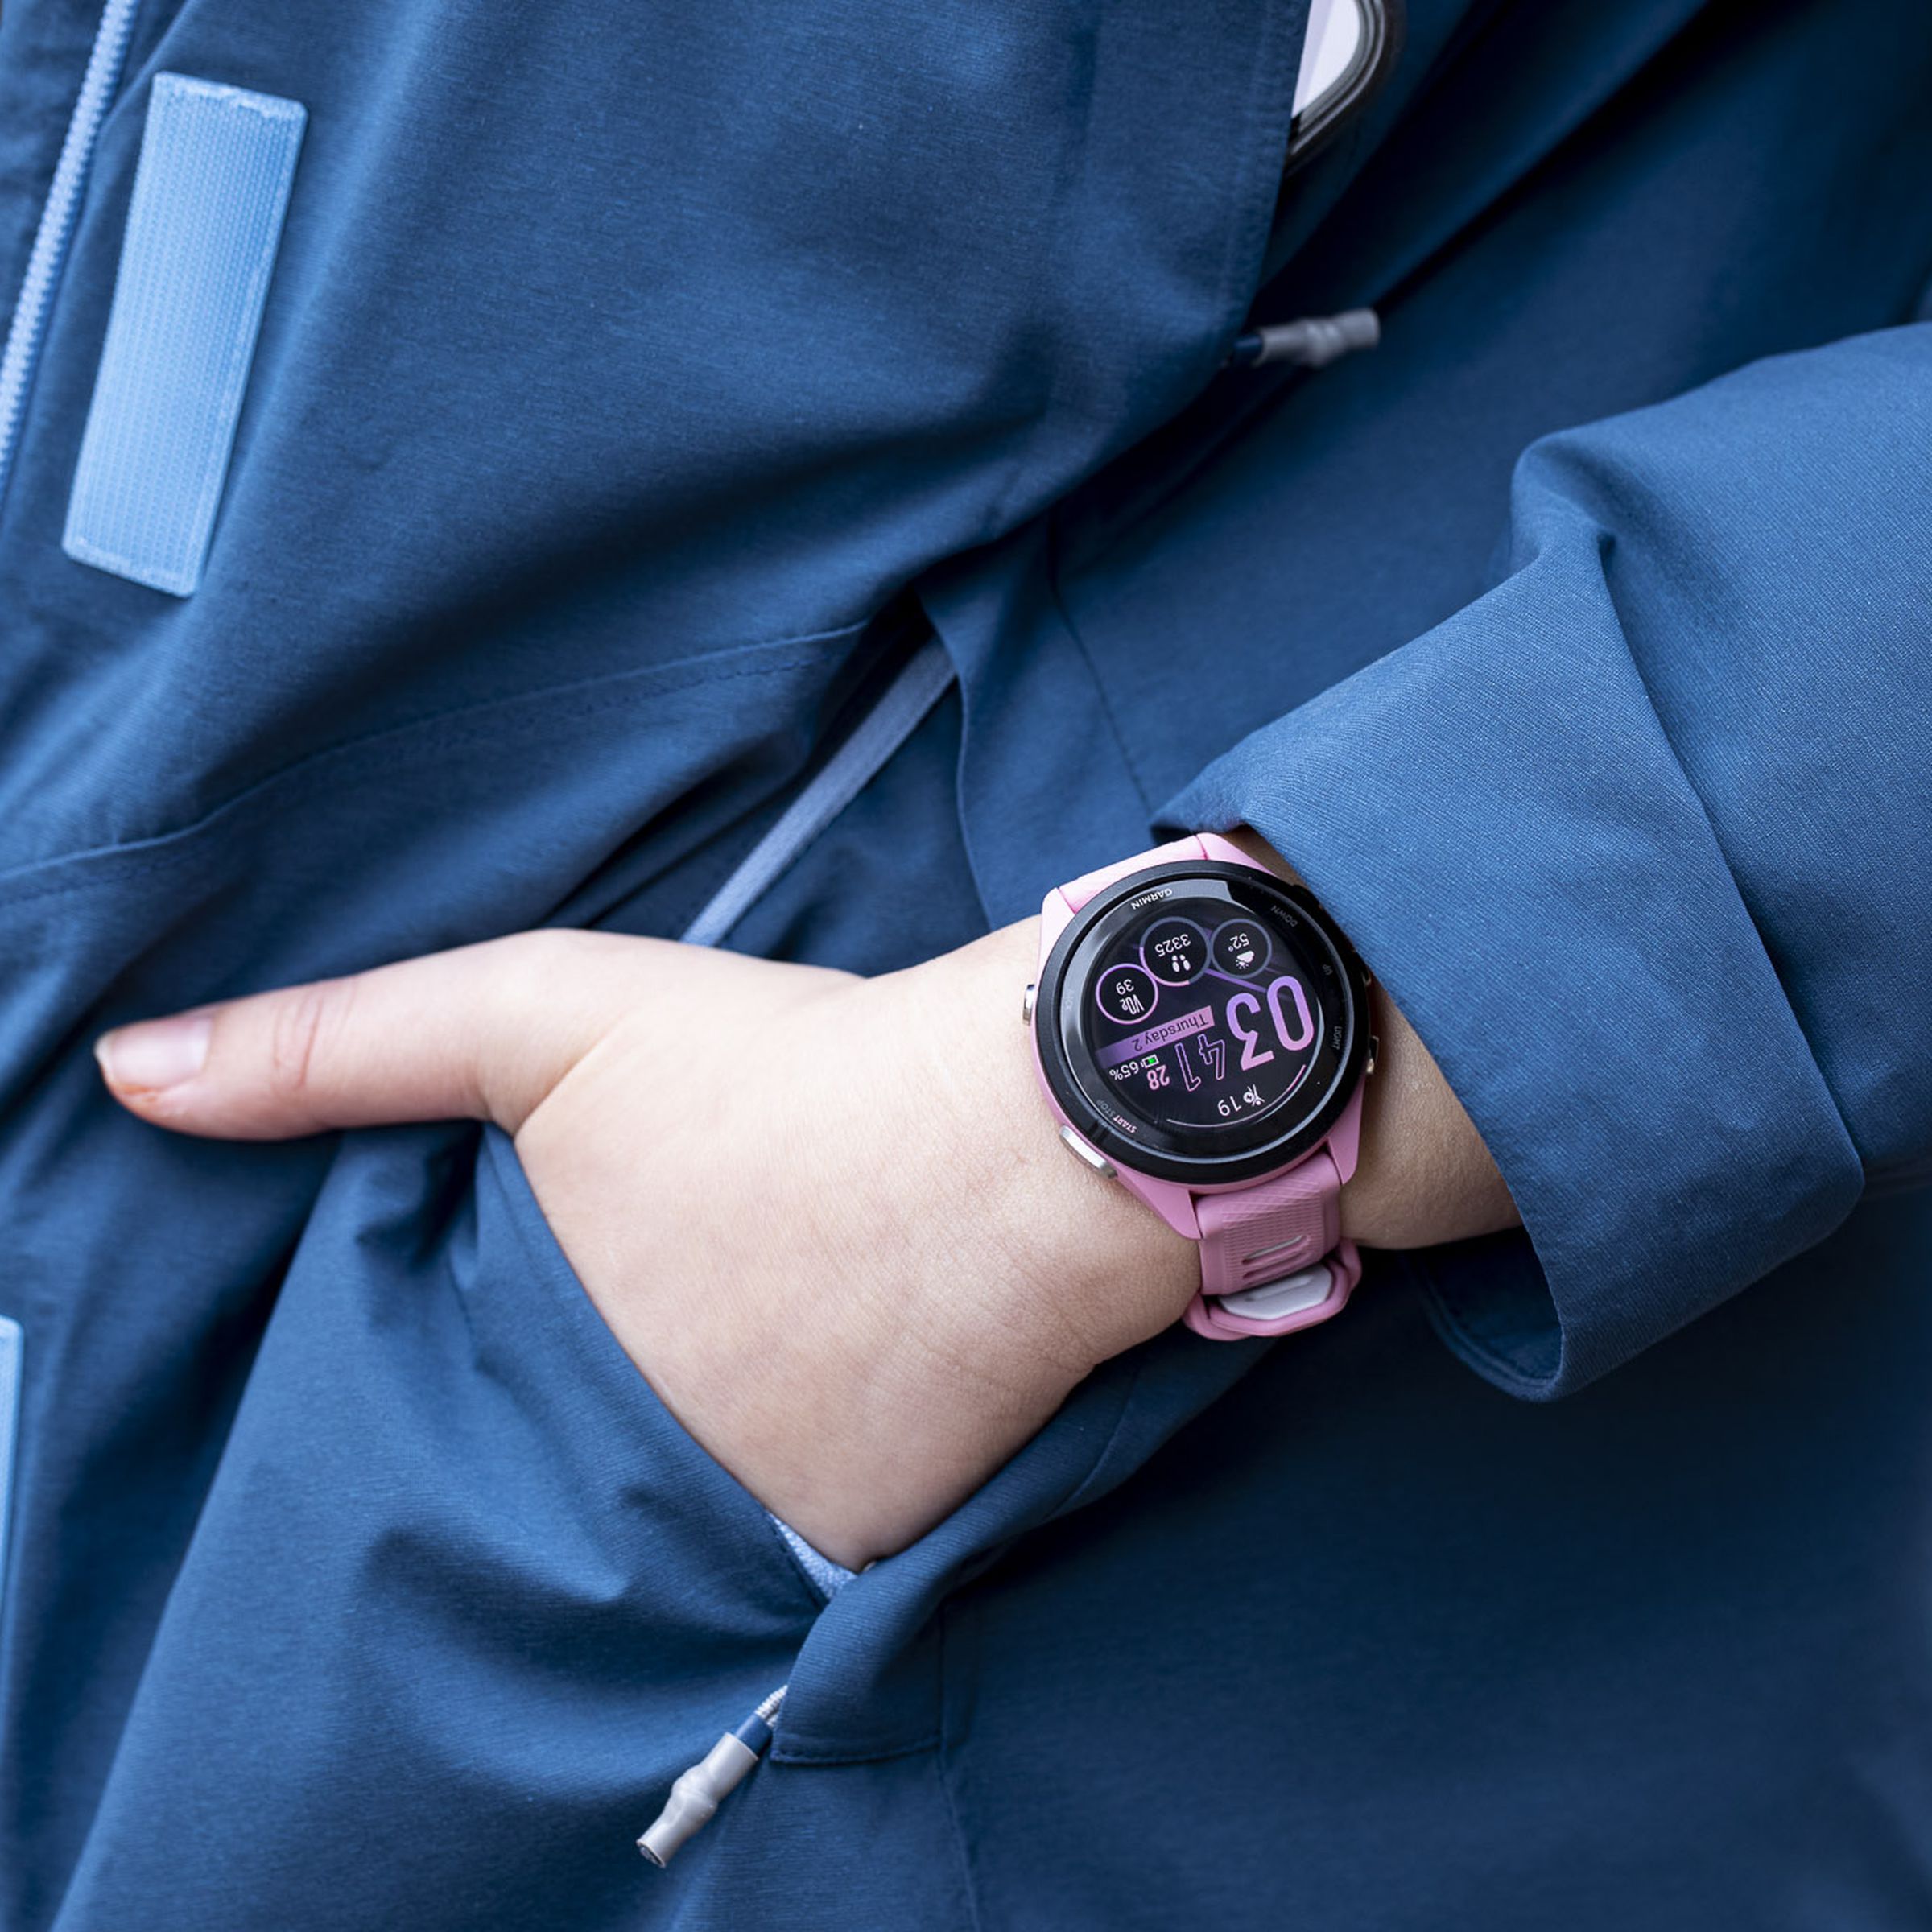 Close-up of the Garmin Forerunner 265S on the wrist of a person putting their hand into a jacket pocket.